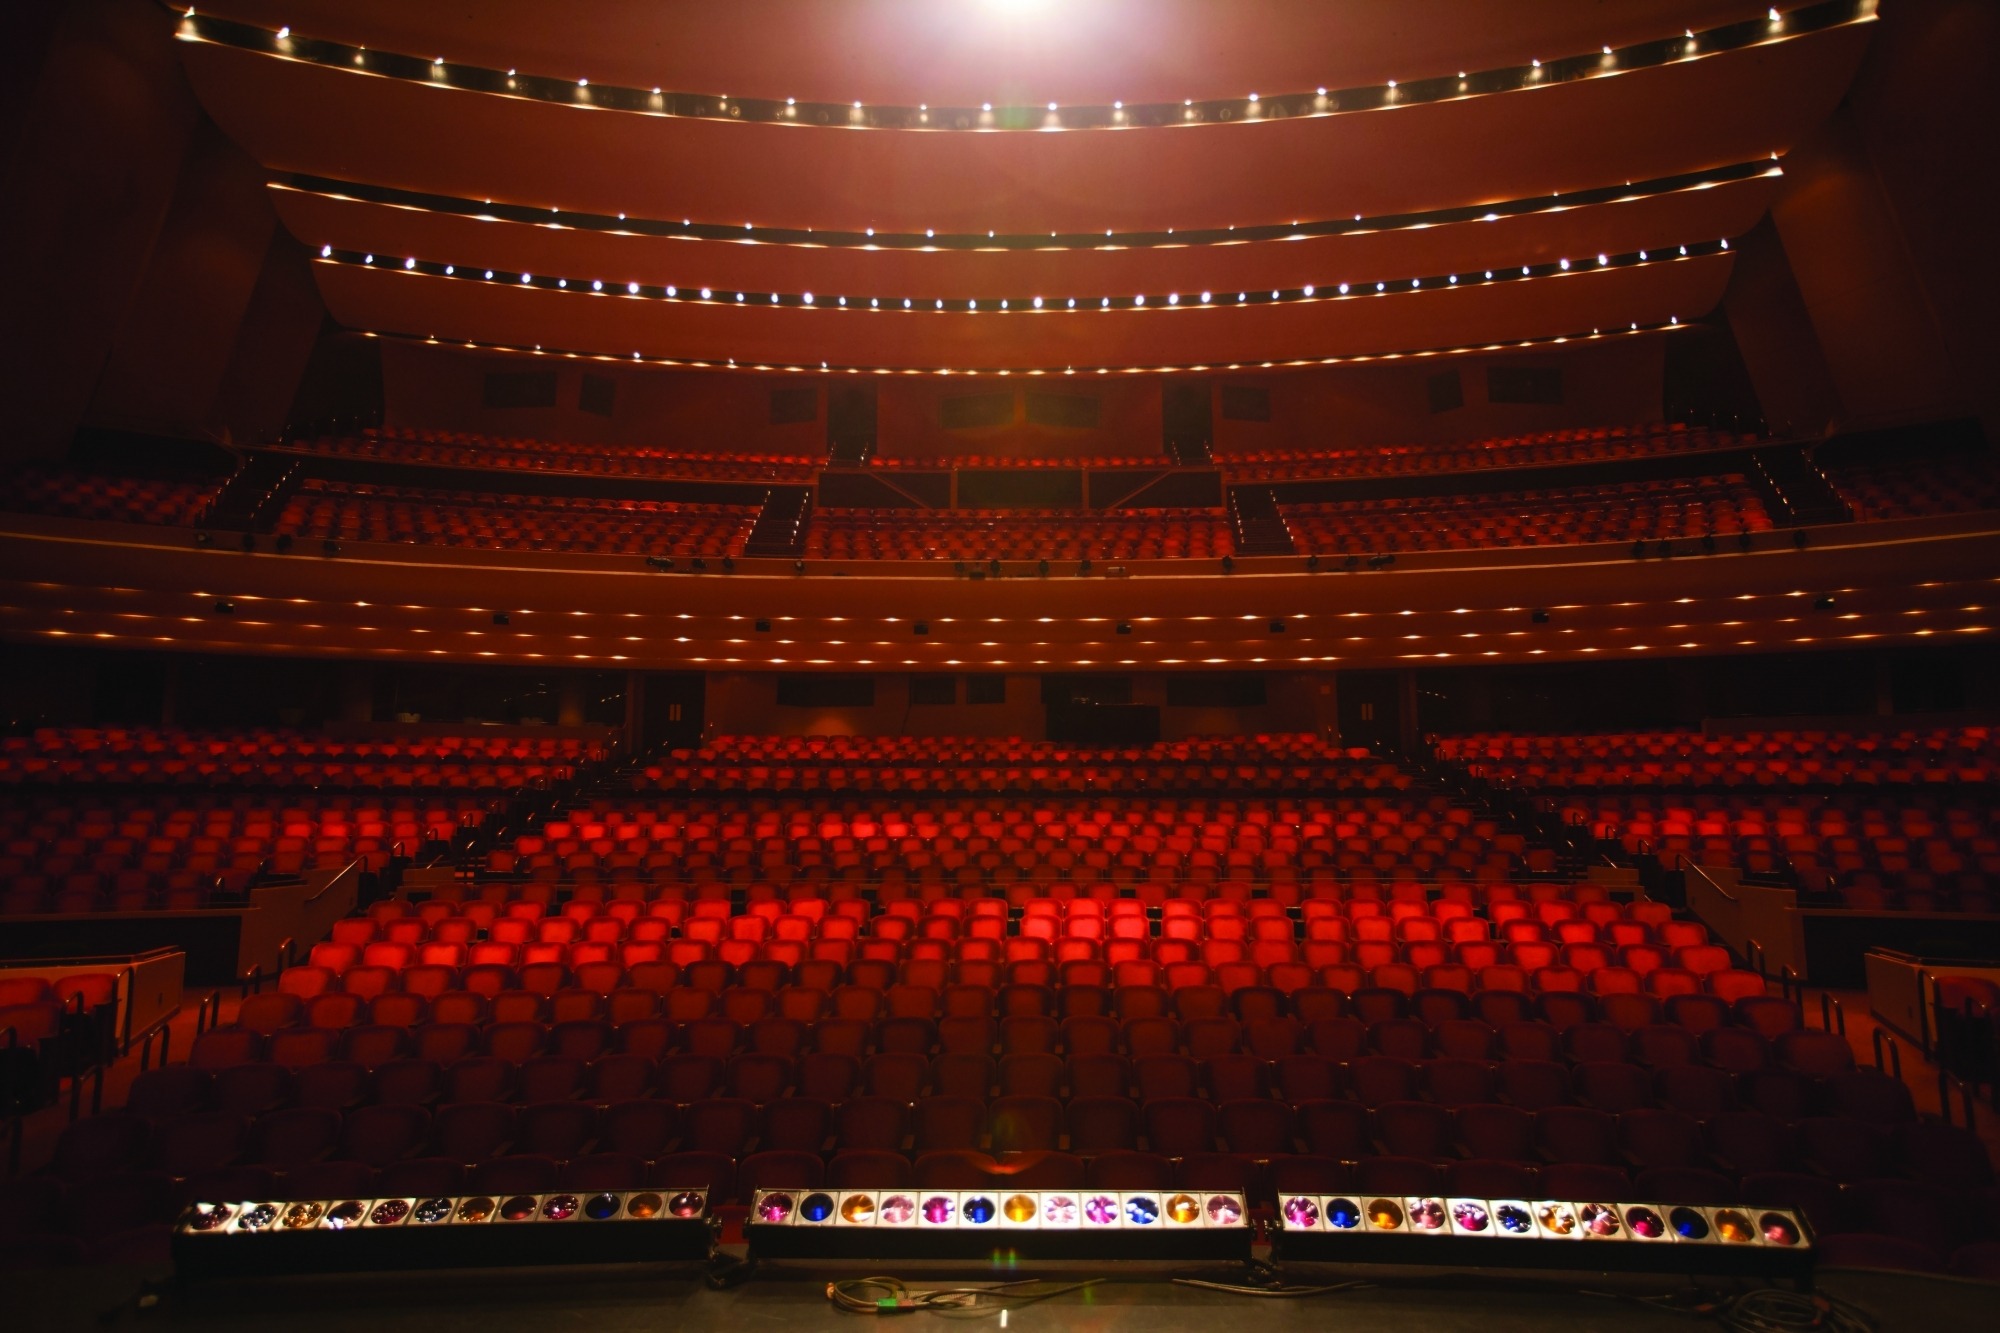 Image from the Lied Center stage looking out towards the empty hall